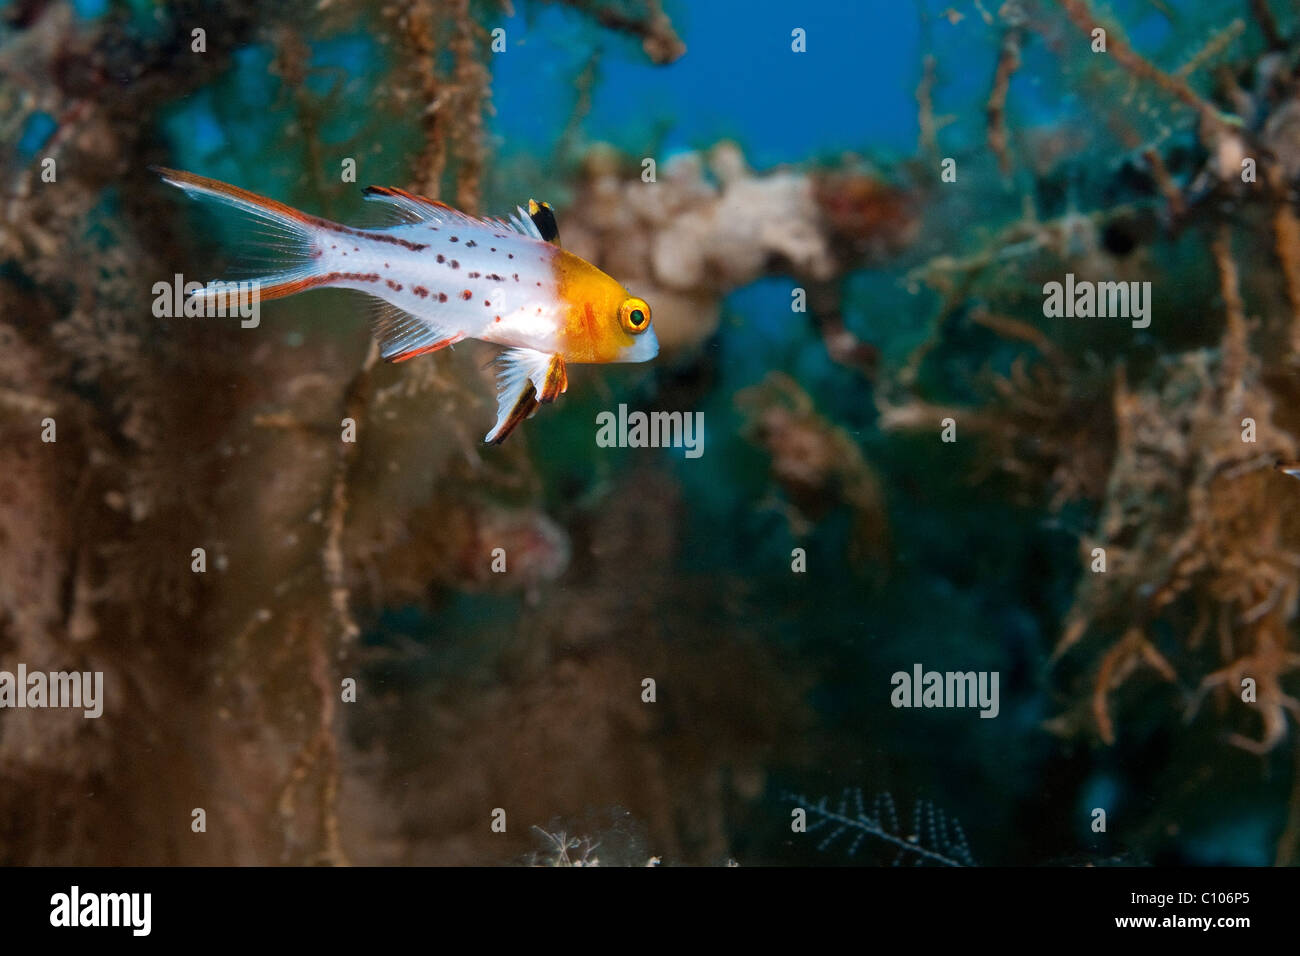 Underwater photography of a Lyretail hogfish (Bodianus anthioides) Photographed in the Red Sea Israel Stock Photo